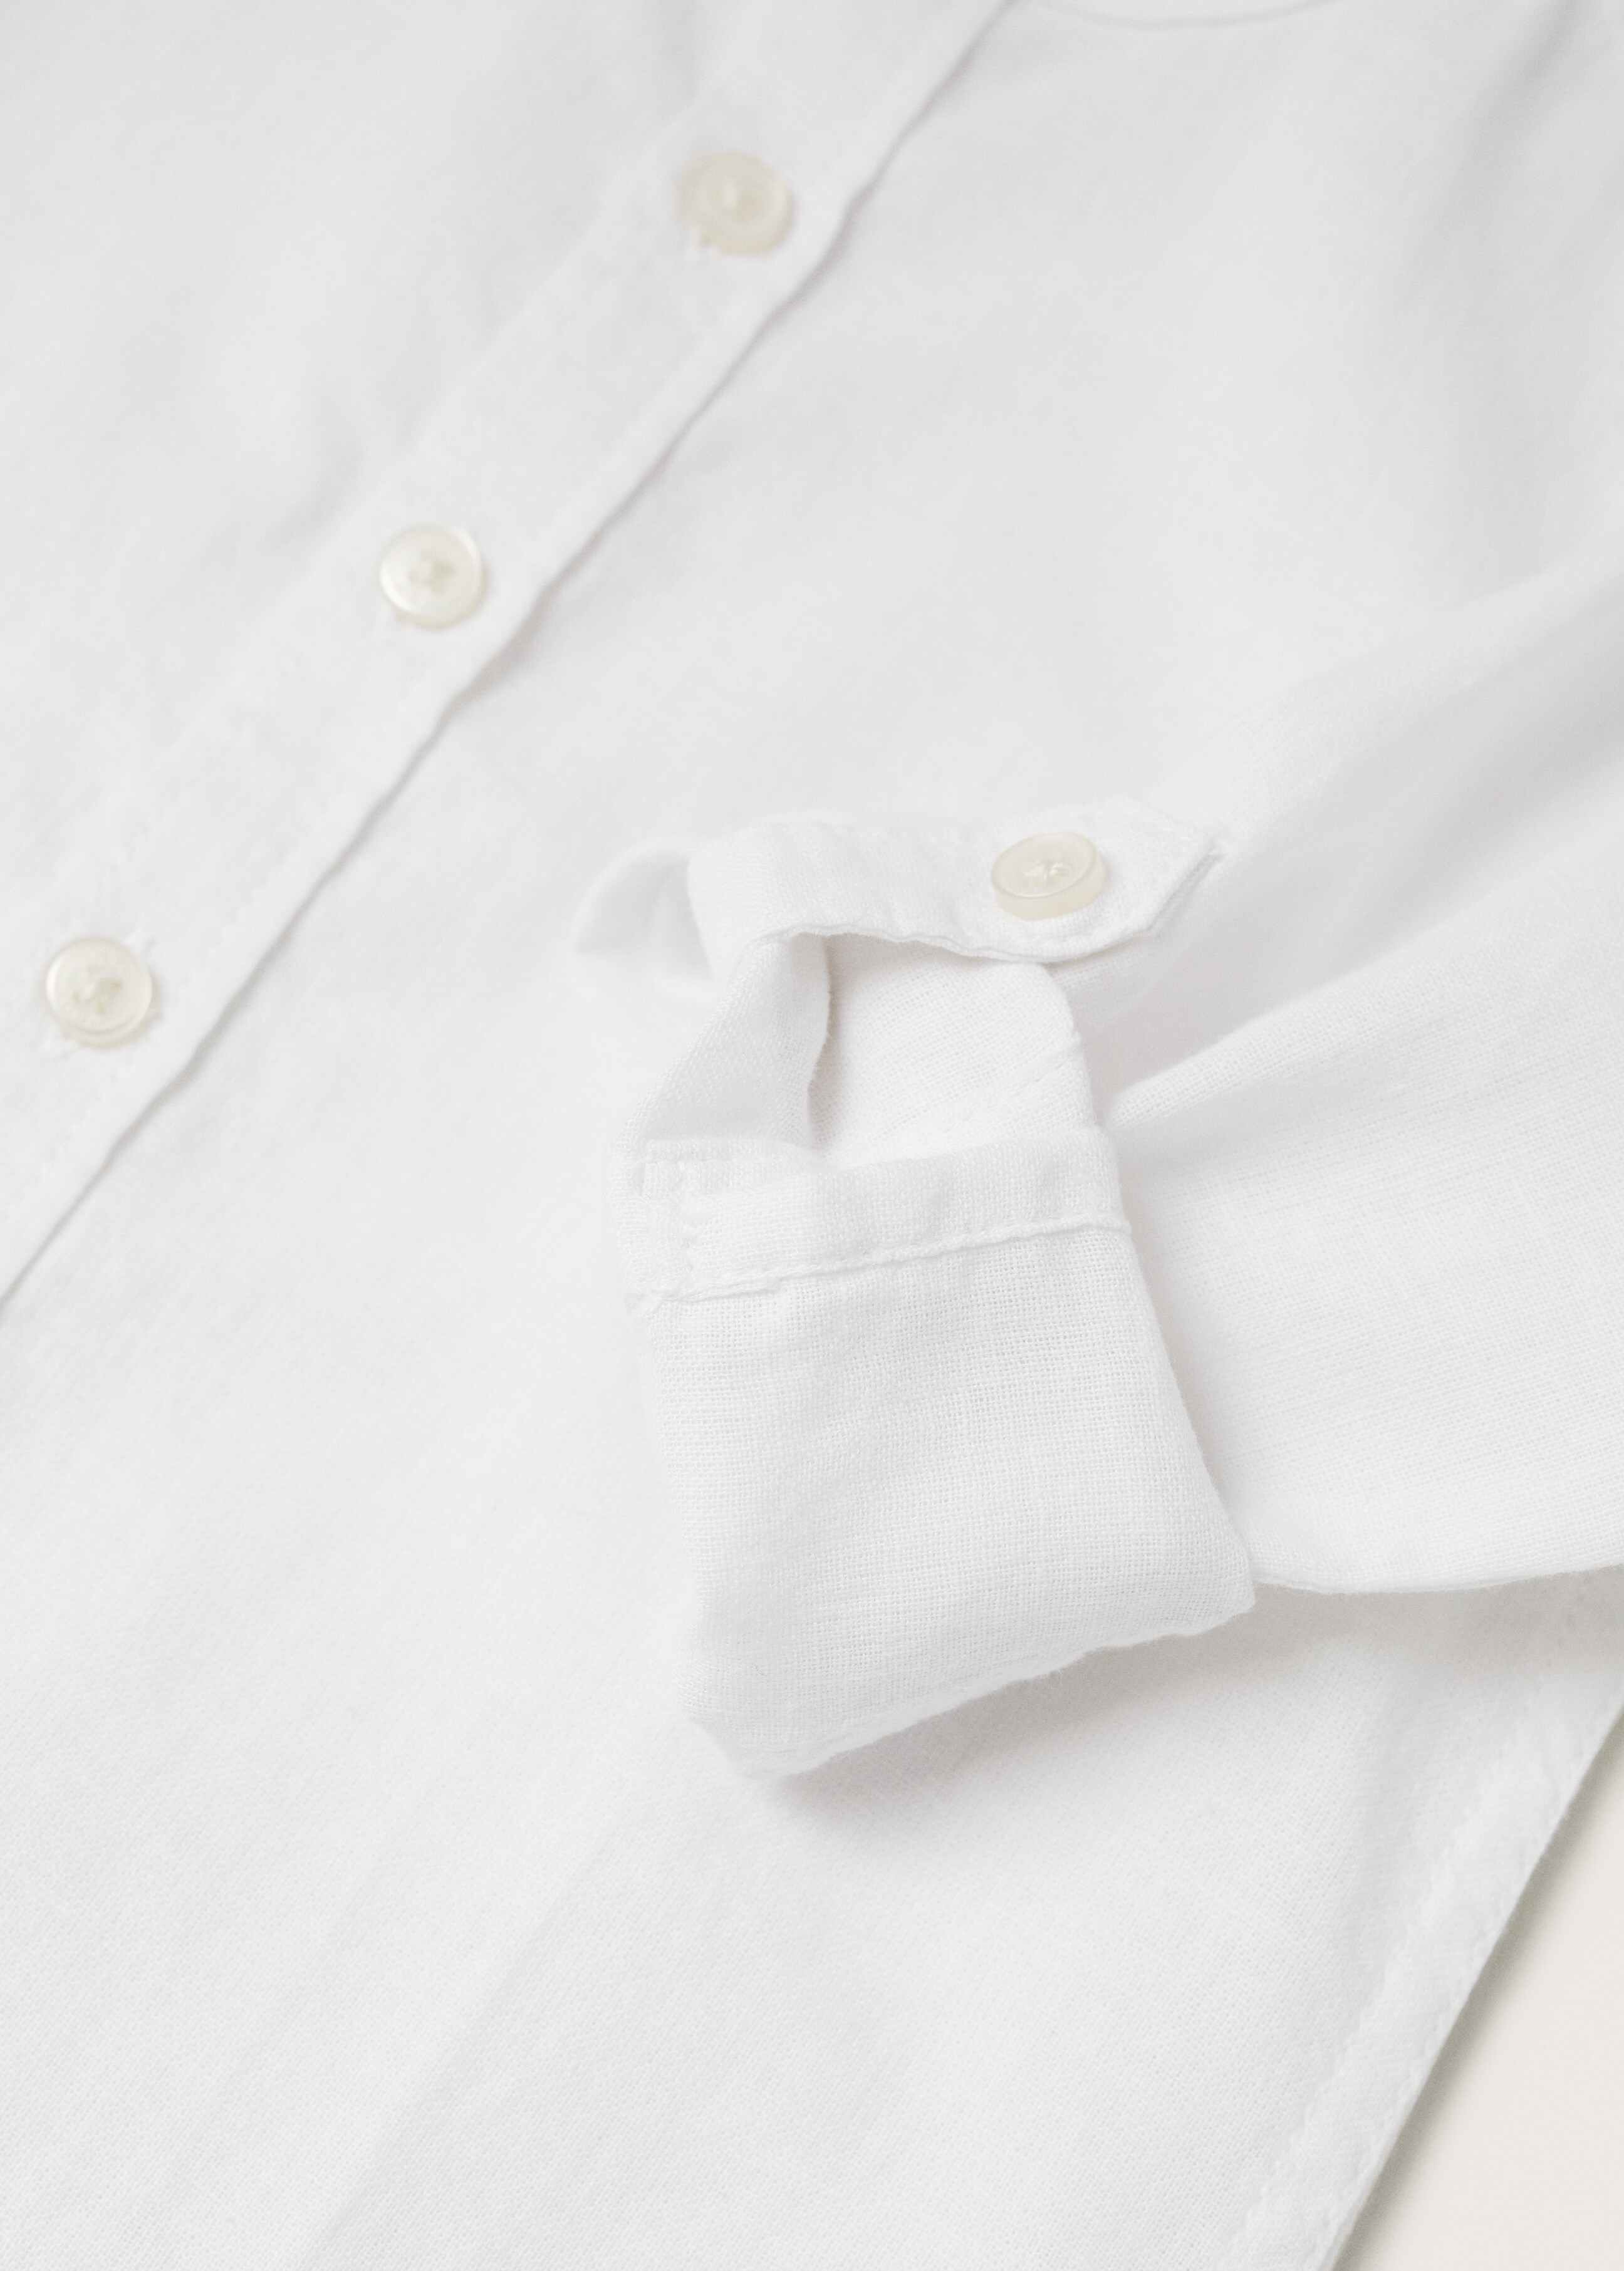 Cotton linen shirt with mandarin collar - Details of the article 9